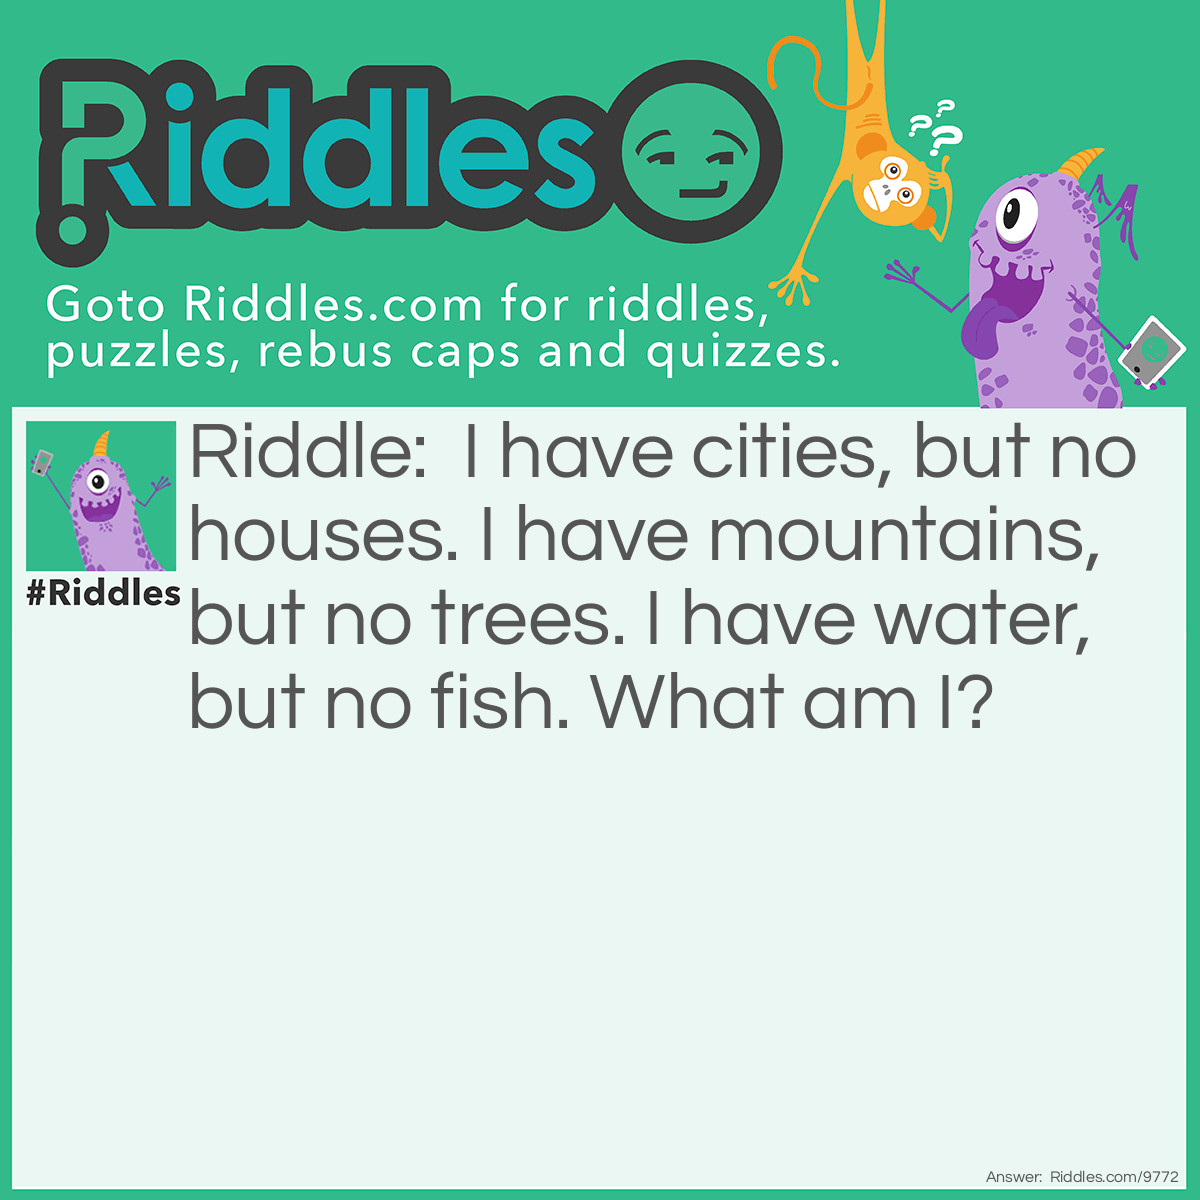 Riddle: I have cities, but no houses. I have mountains, but no trees. I have water, but no fish. What am I? Answer: A map!